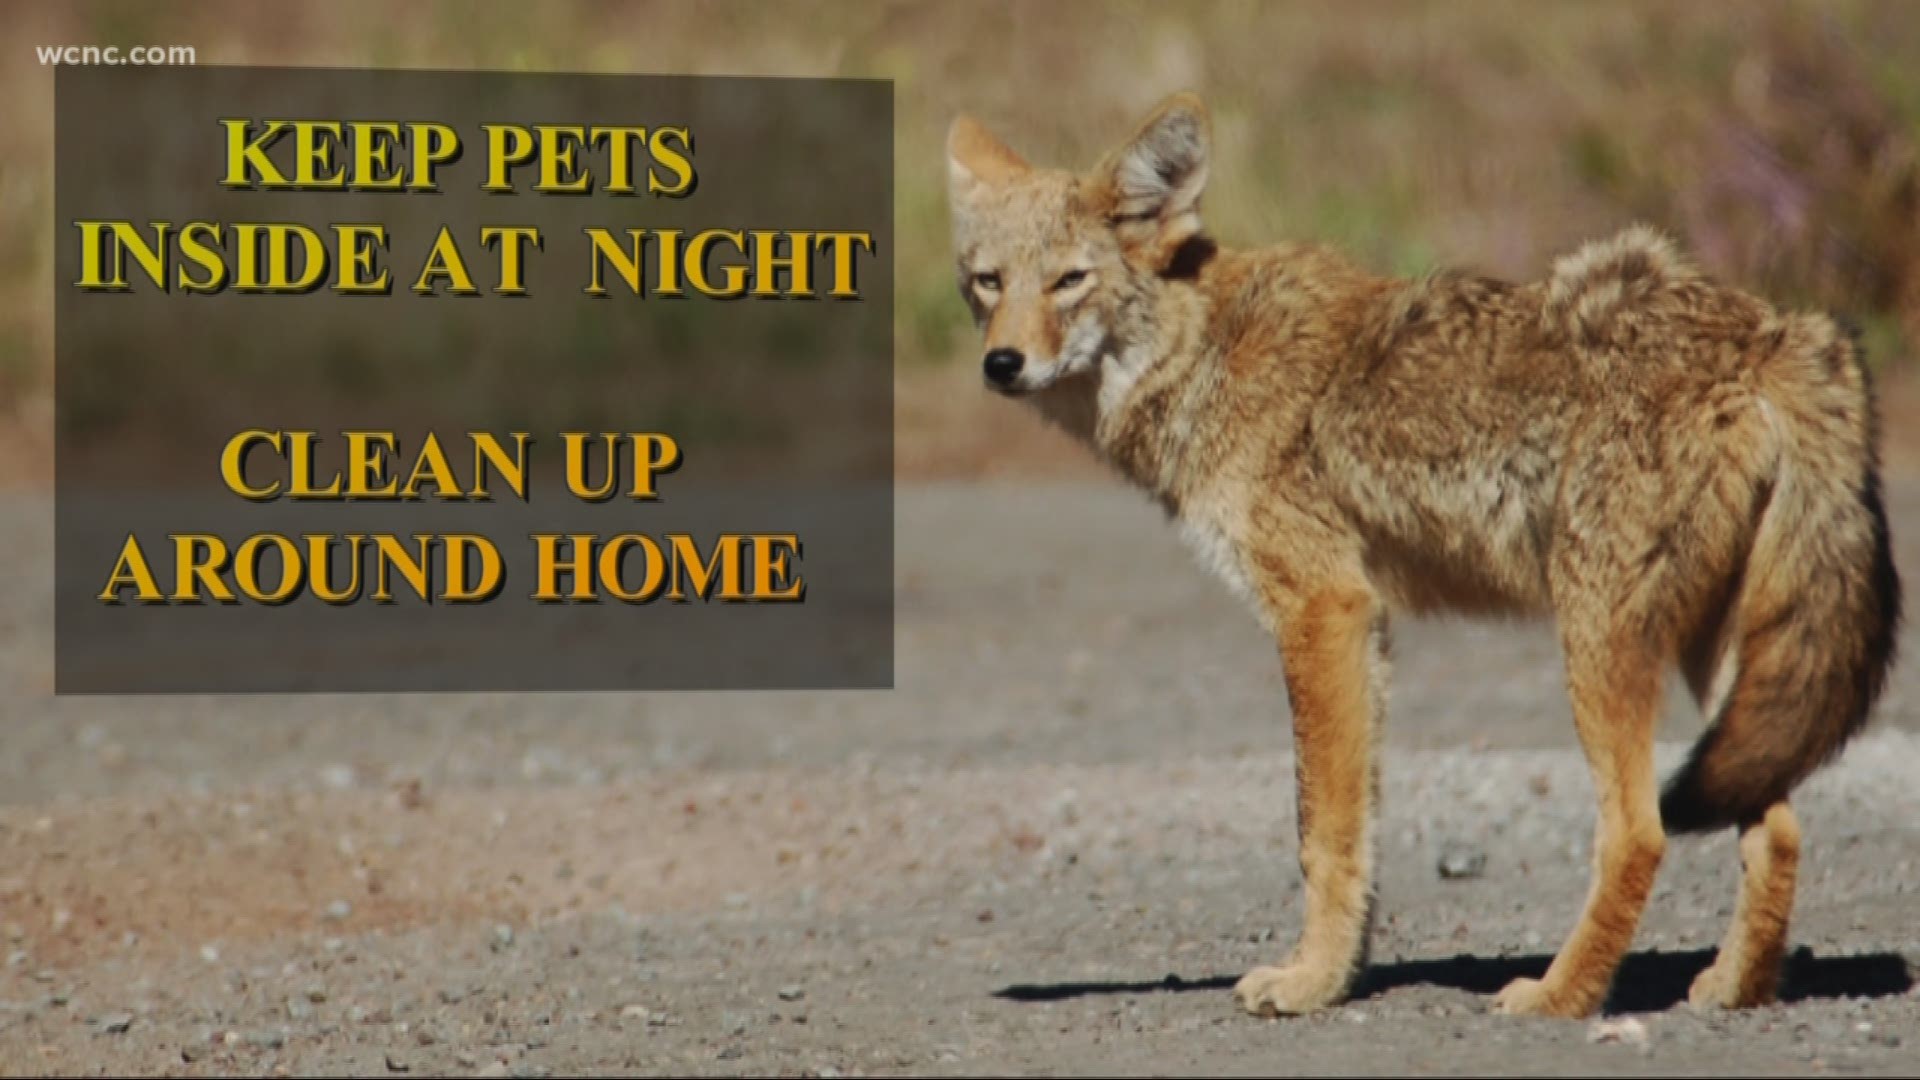 Coyote experts say the pups born last spring are now active and ready to head out on their own.